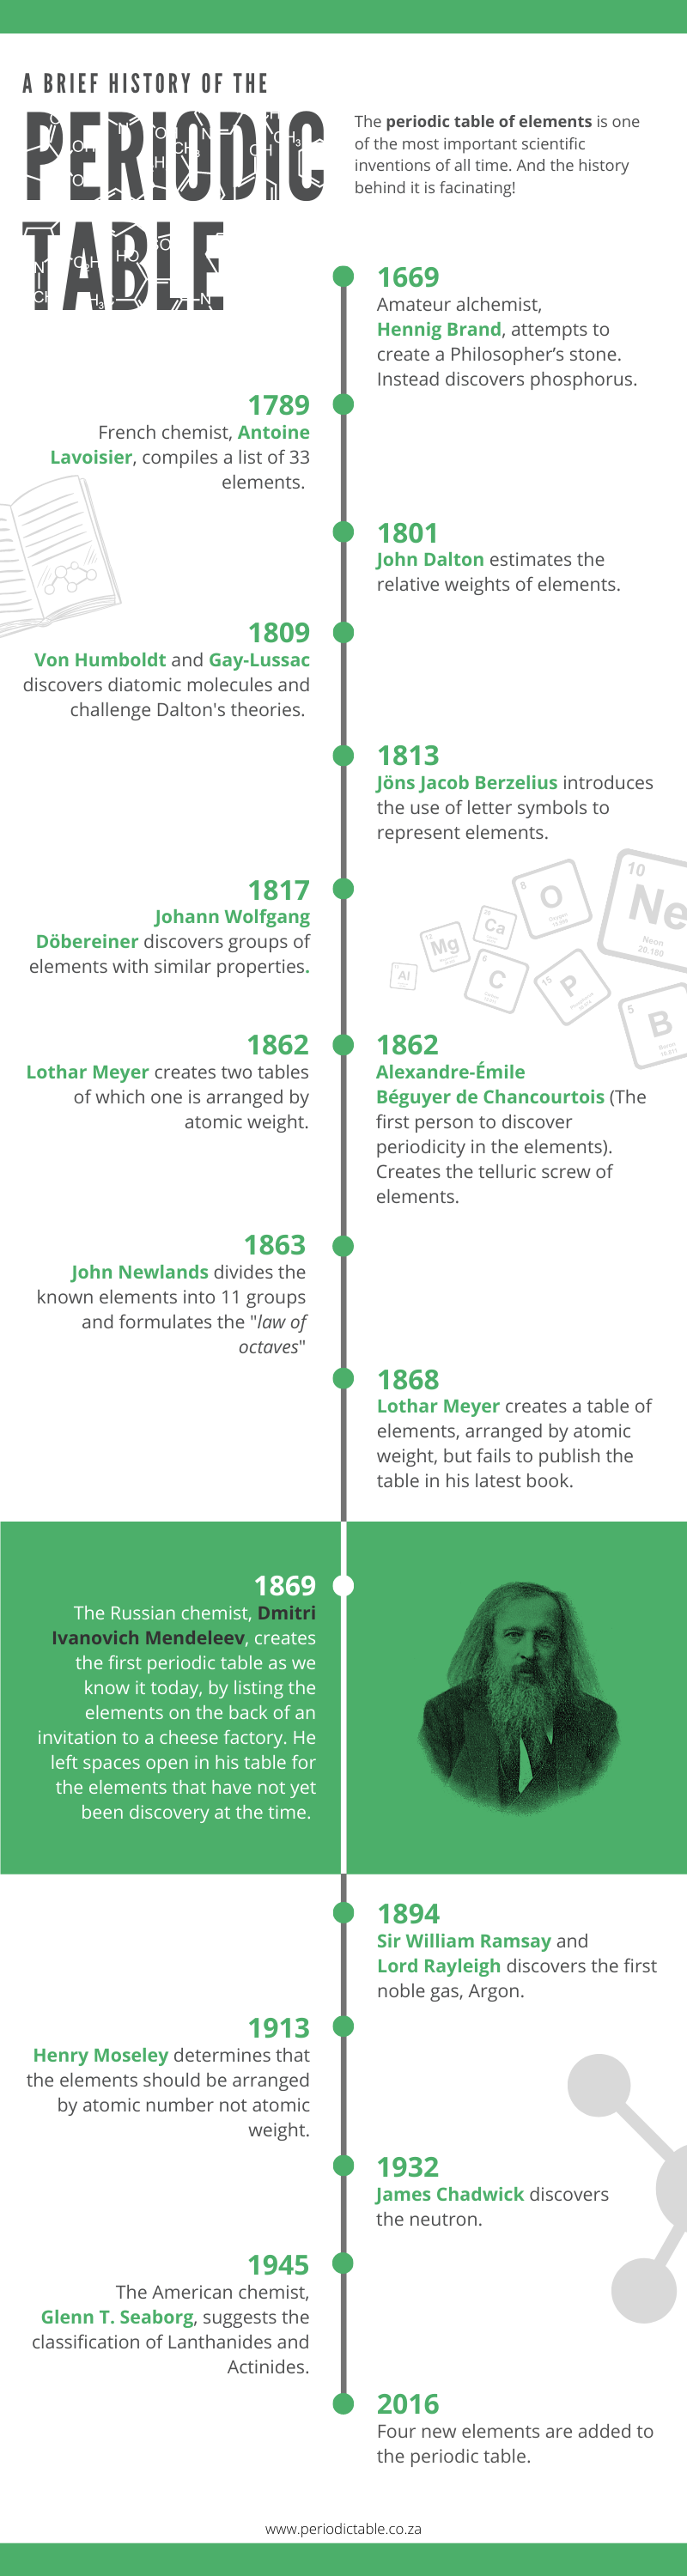 A brief history of the periodic table: Infographic